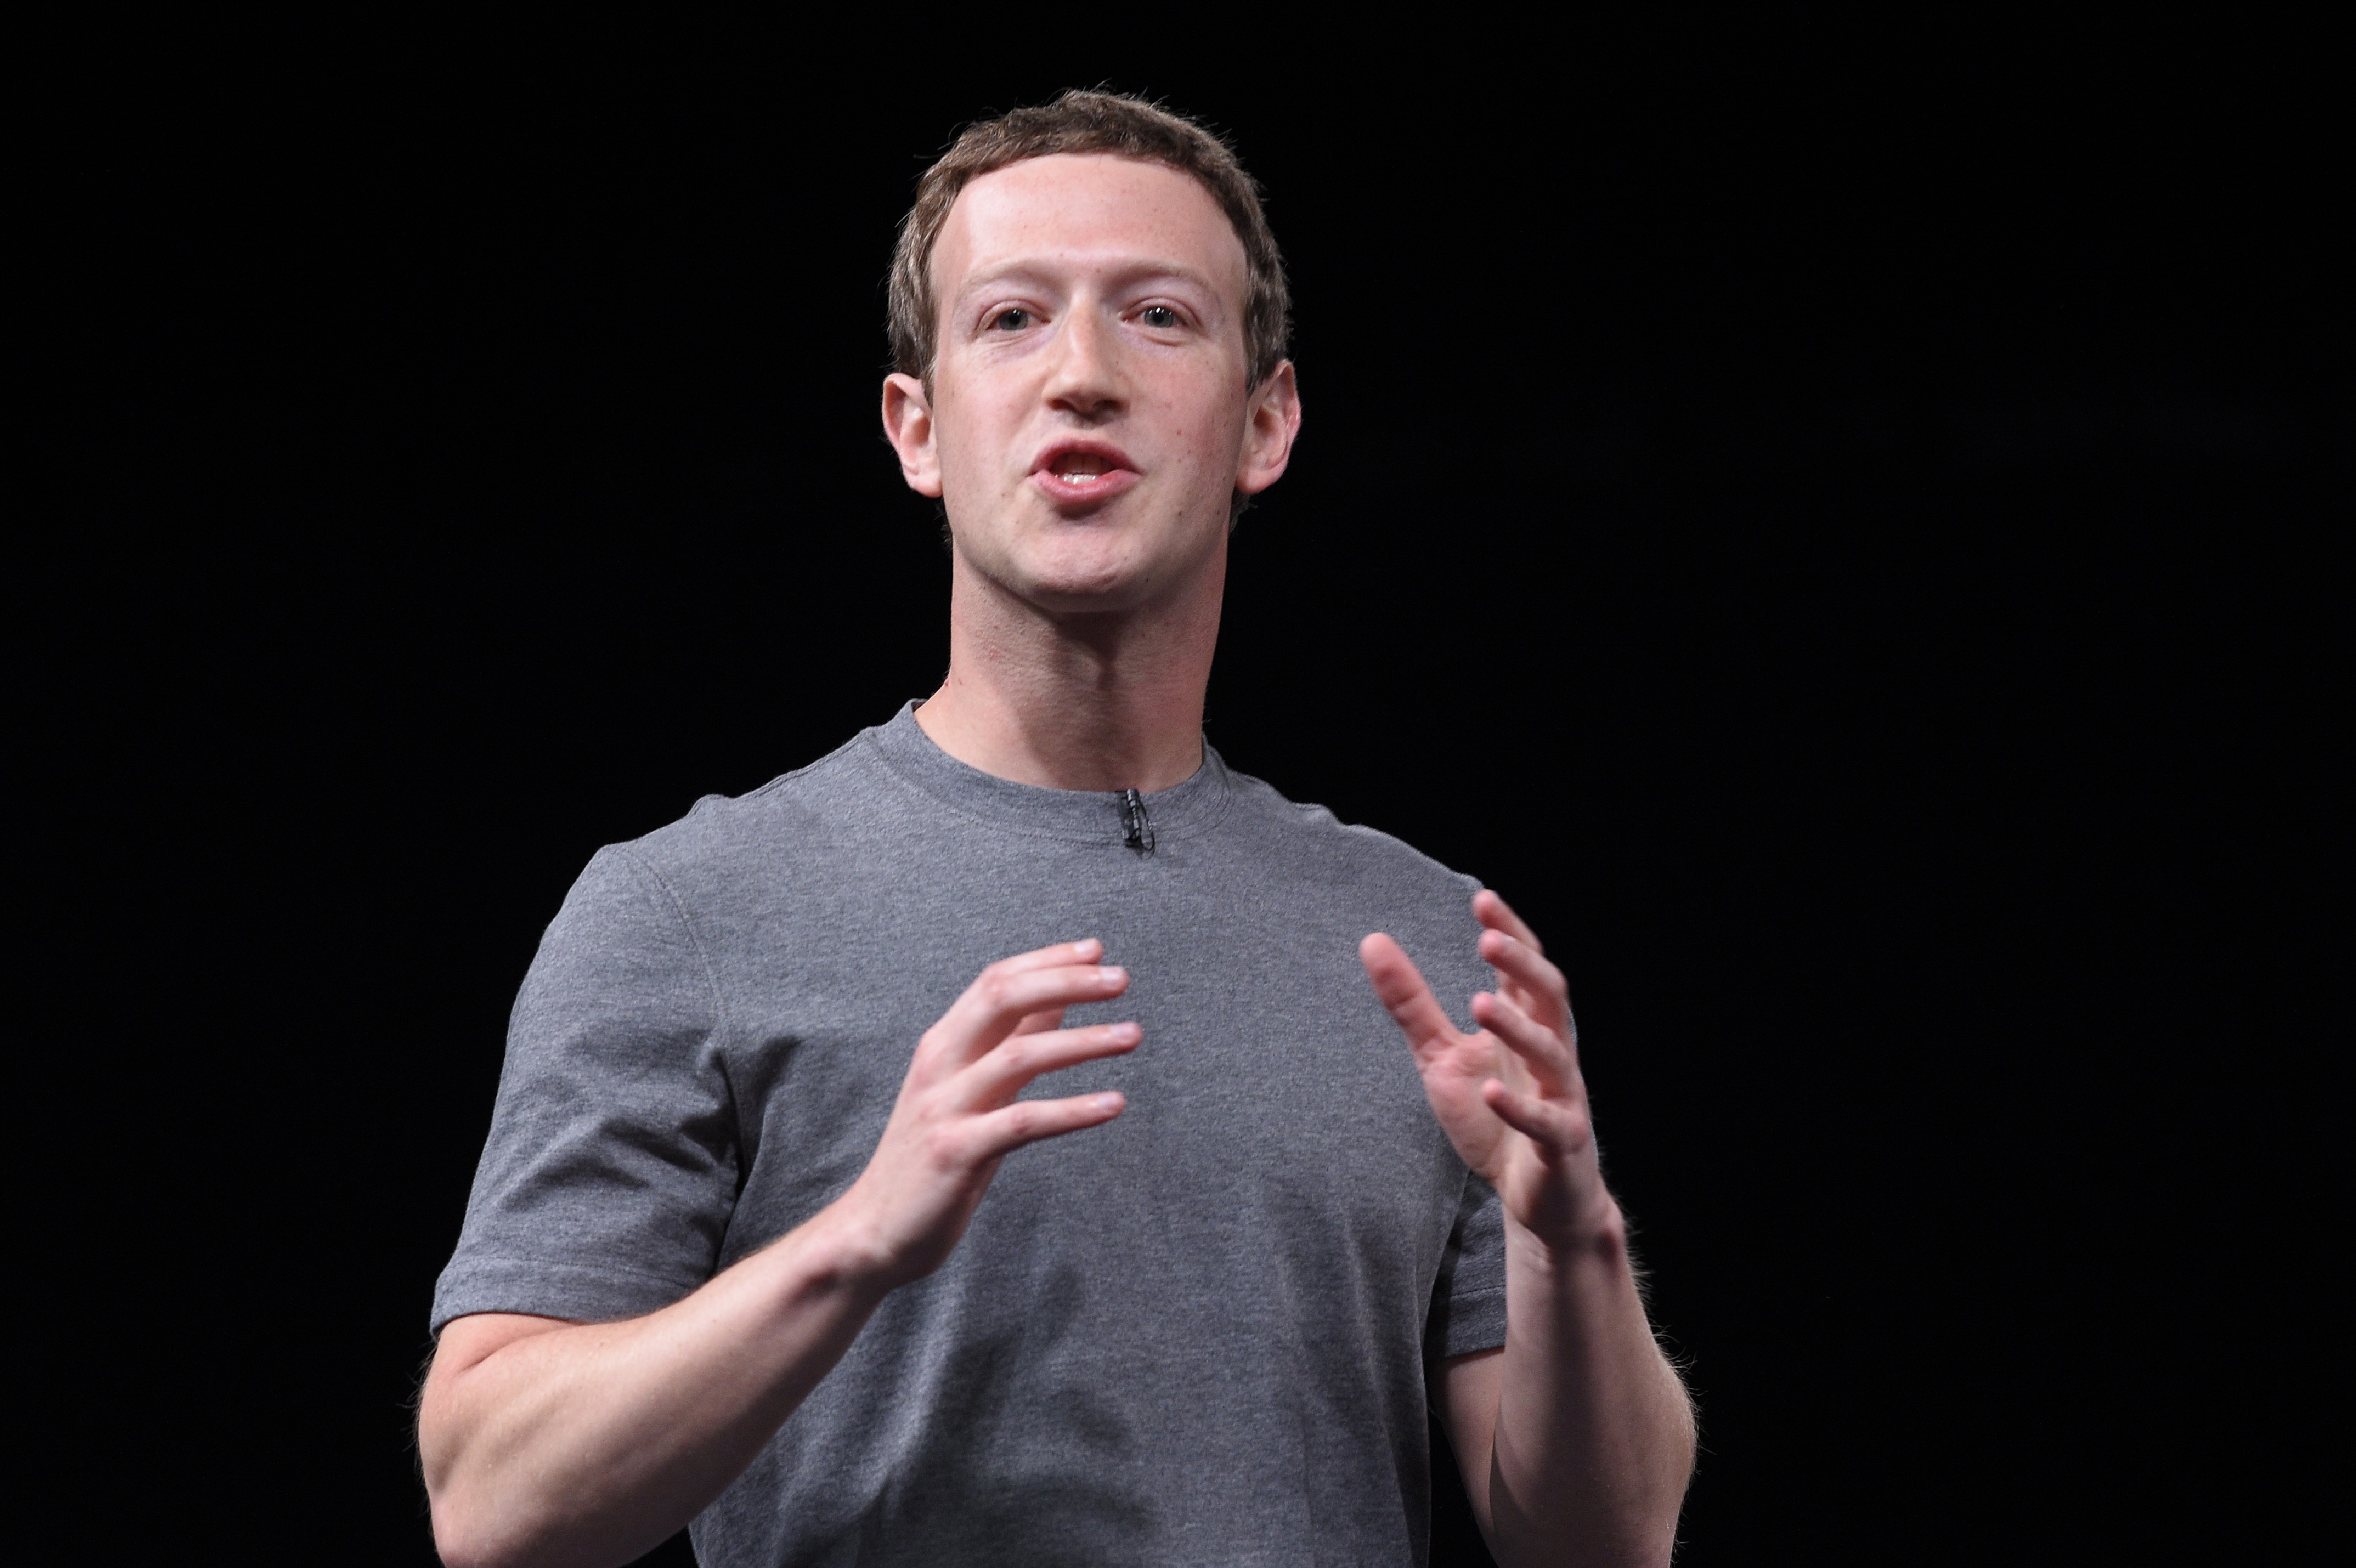 (FILES) This file photo taken on February 21, 2016 shows CEO and co-founder of the social networking website Facebook Mark Zuckerberg speaking during a press conference in Barcelona. Facebook co-founder Mark Zuckerberg and his wife on September 21, 2016 pledged $3 billion over the coming decade on a drive to prevent, cure, or manage every disease in their daughter's lifetime. "This is a big goal," Zuckerberg said at a San Francisco event announcing the next goal of the Chan Zuckerberg Initiative established by the couple. "But we spent the last few years speaking with experts who think it is possible, so we dug in."  / AFP PHOTO / LLUIS GENE